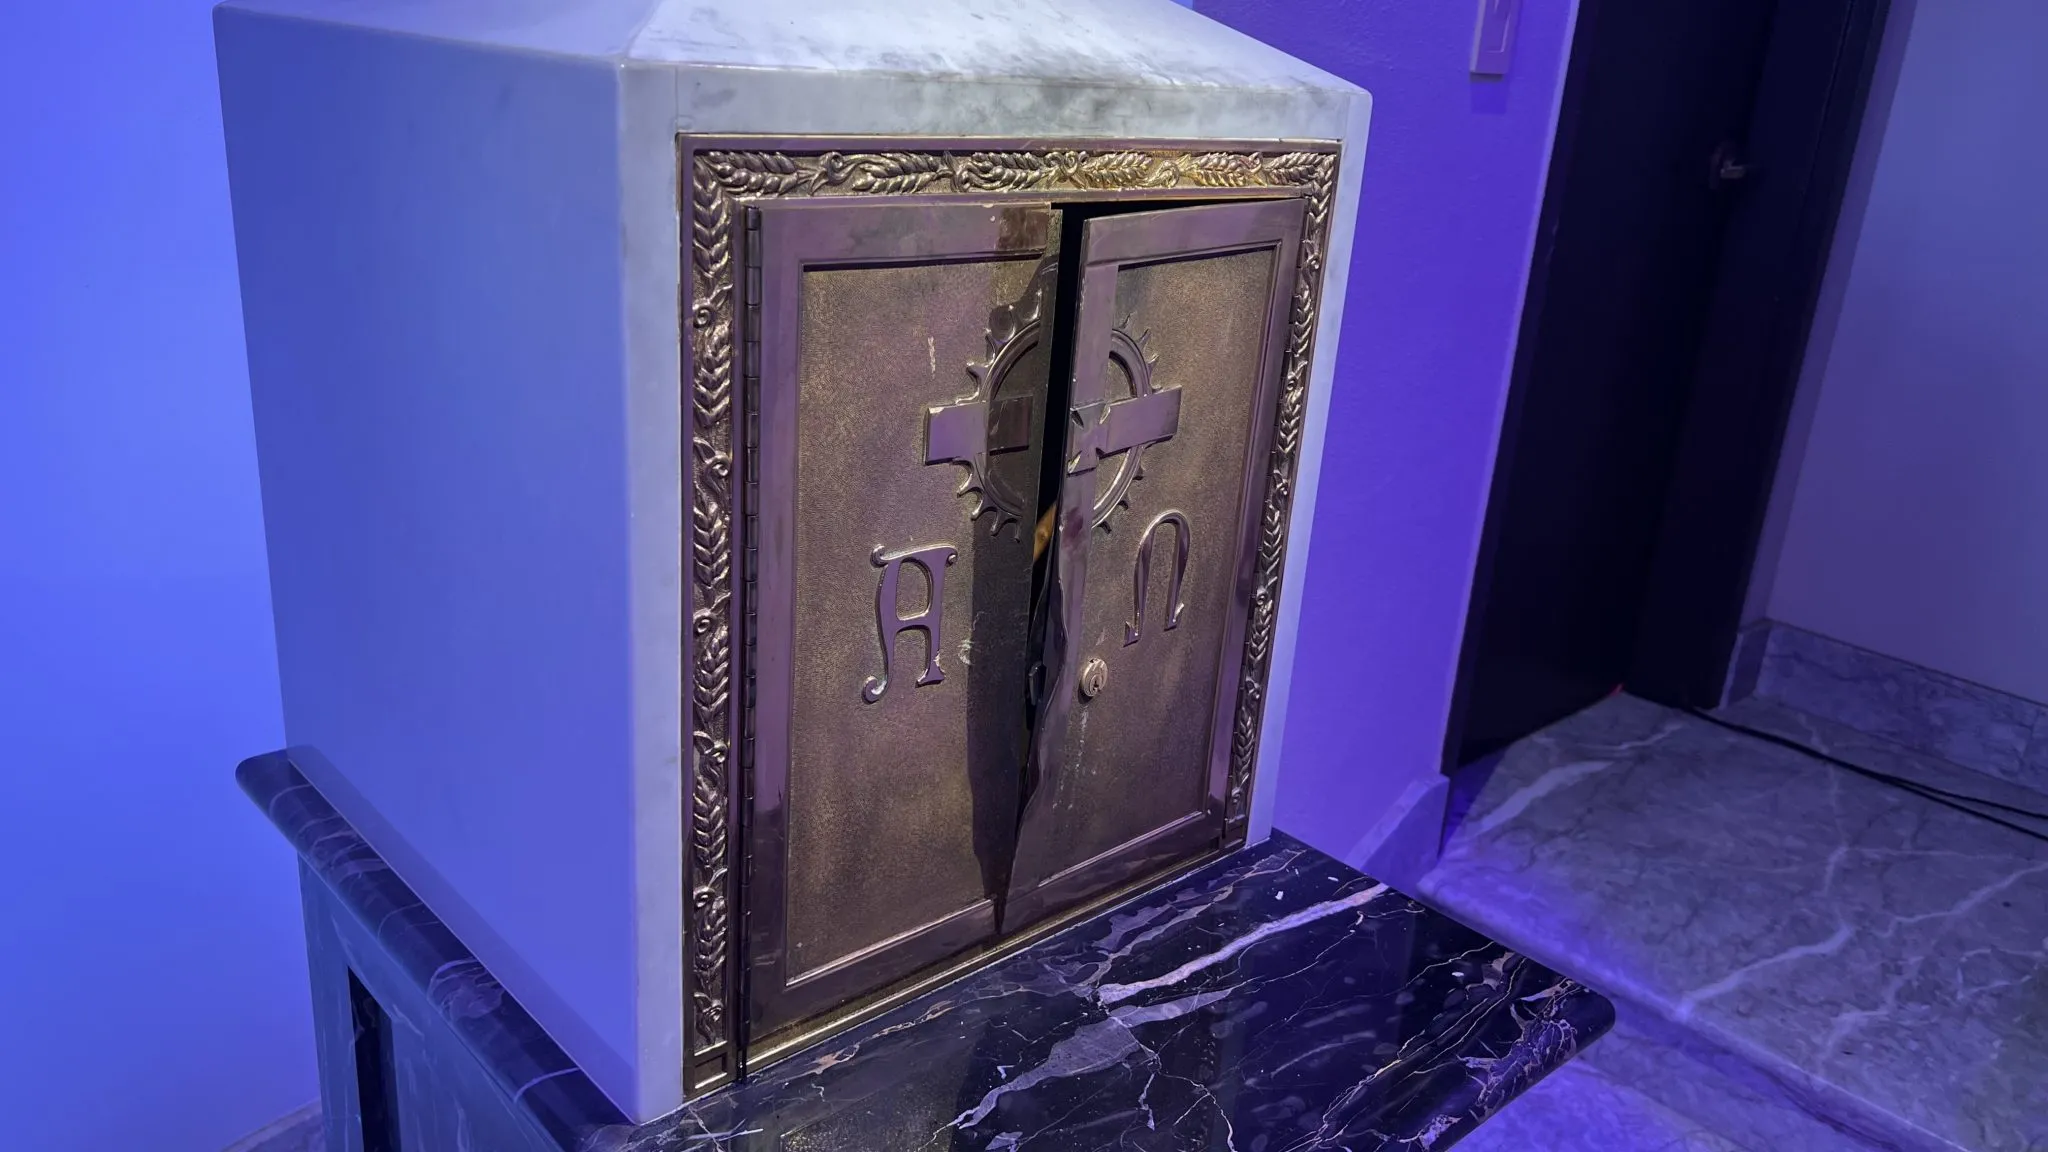 The tabernacle damaged by burglars at St. Monica’s in Santa Monica, Calif.?w=200&h=150